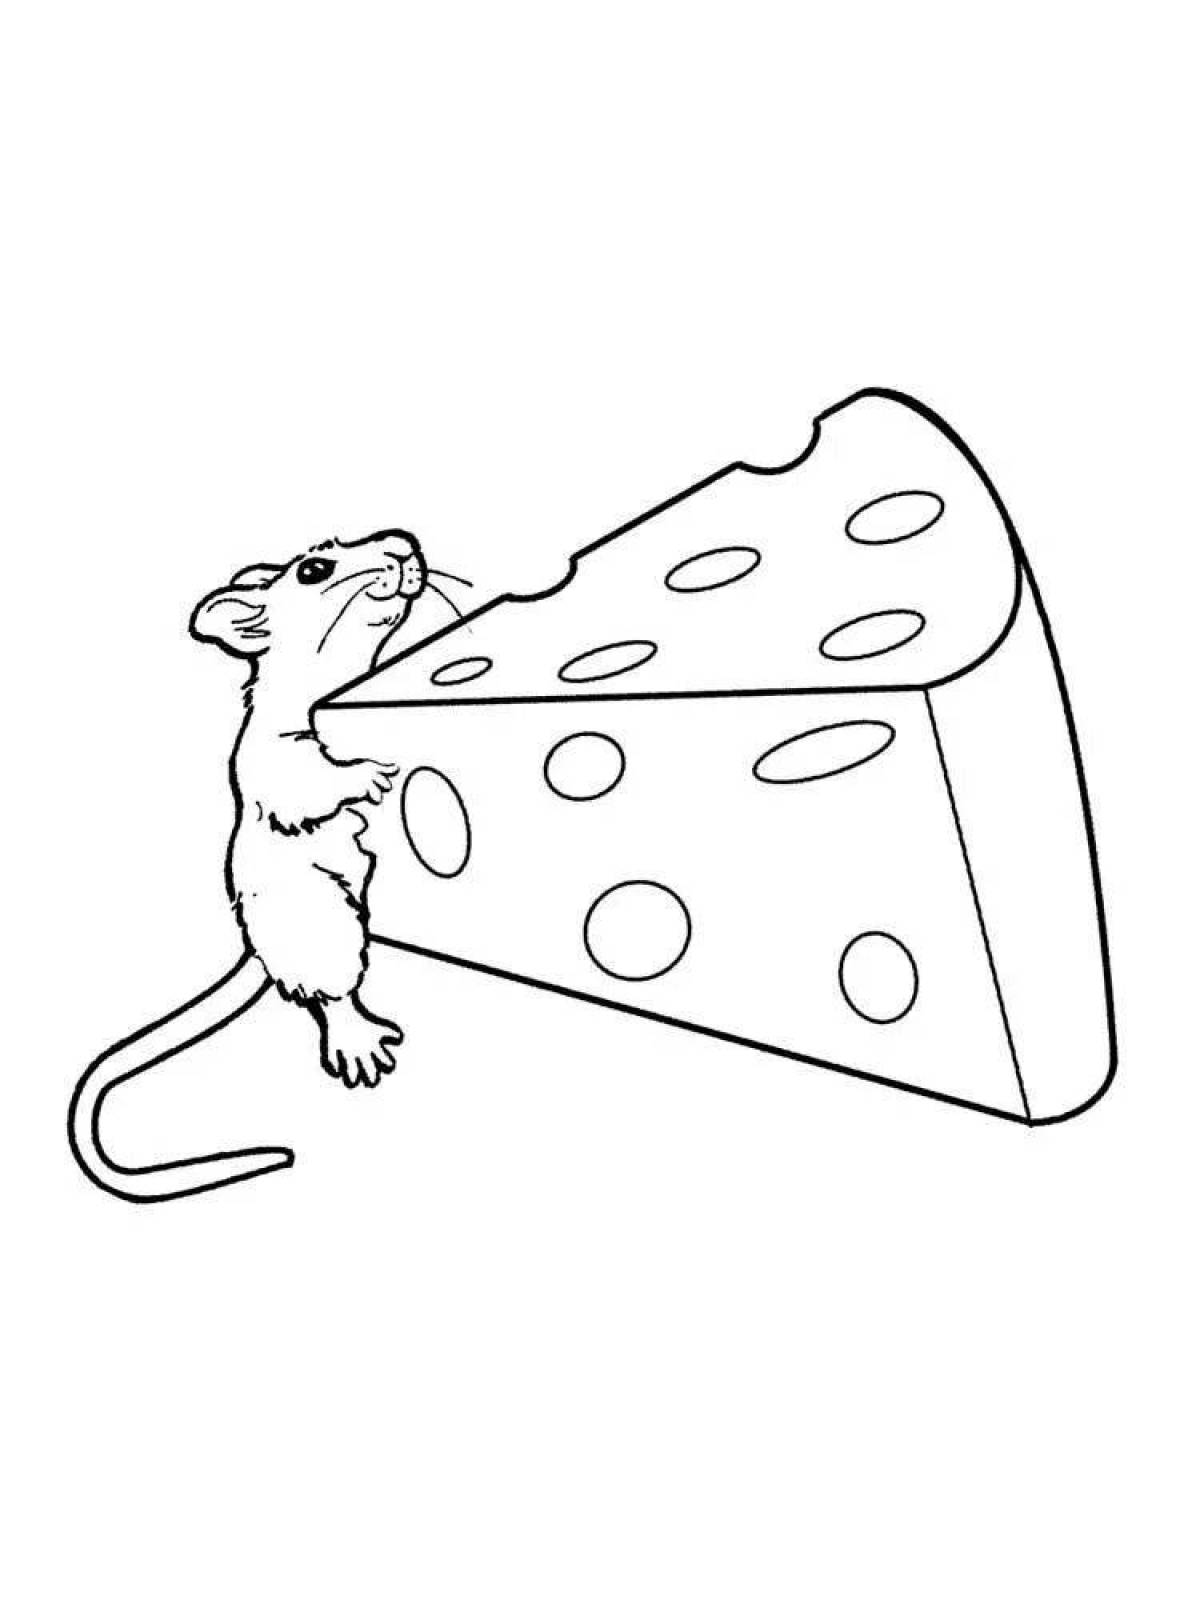 Fairy mouse sausage coloring page